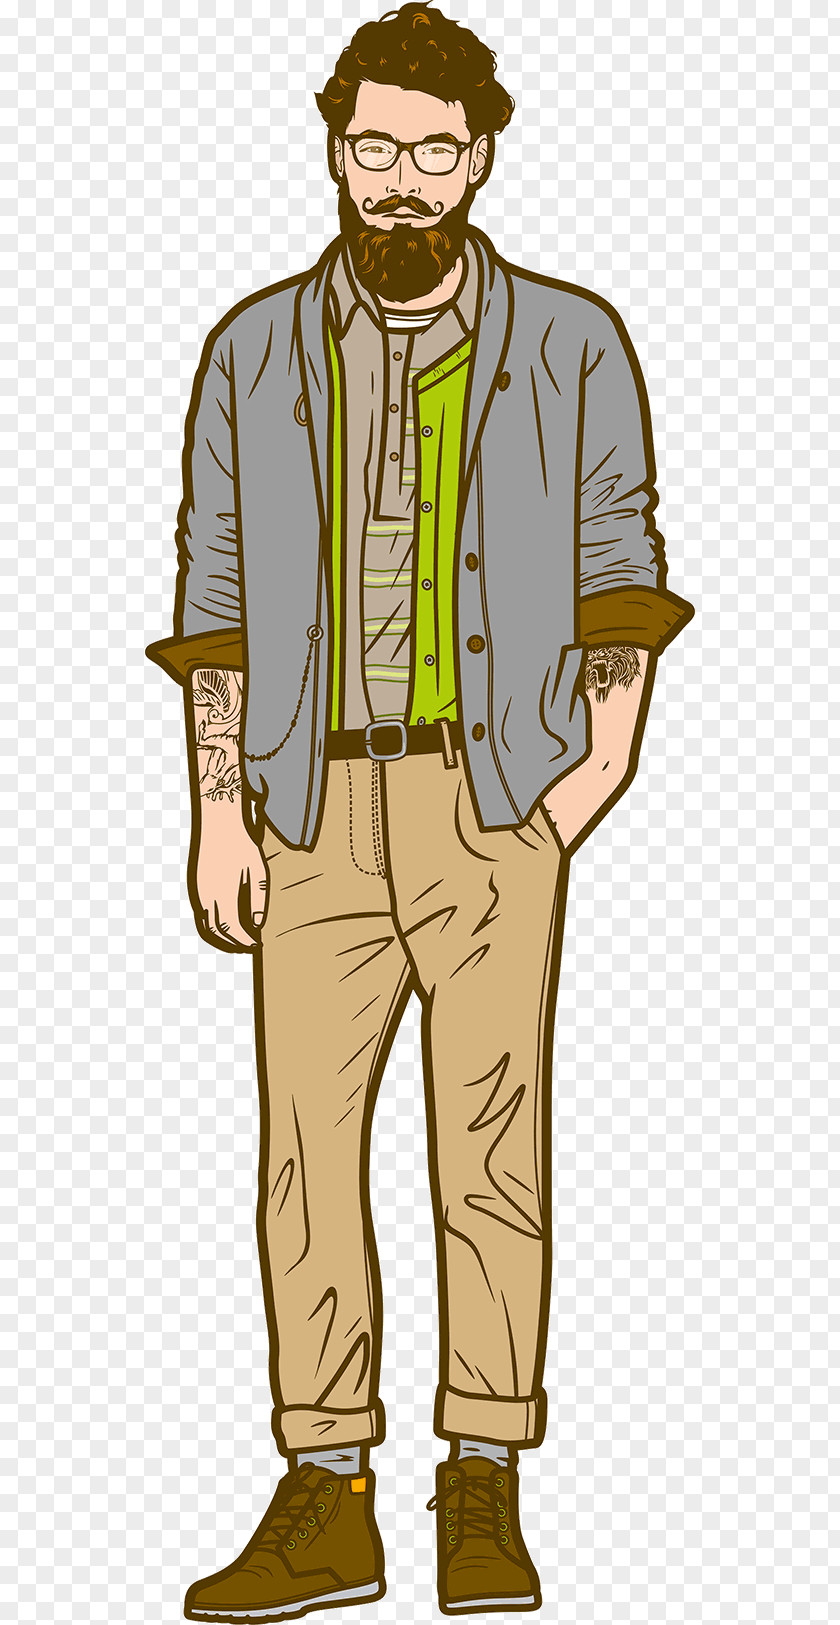 Illustrated Illustration Character Fiction Cartoon PNG